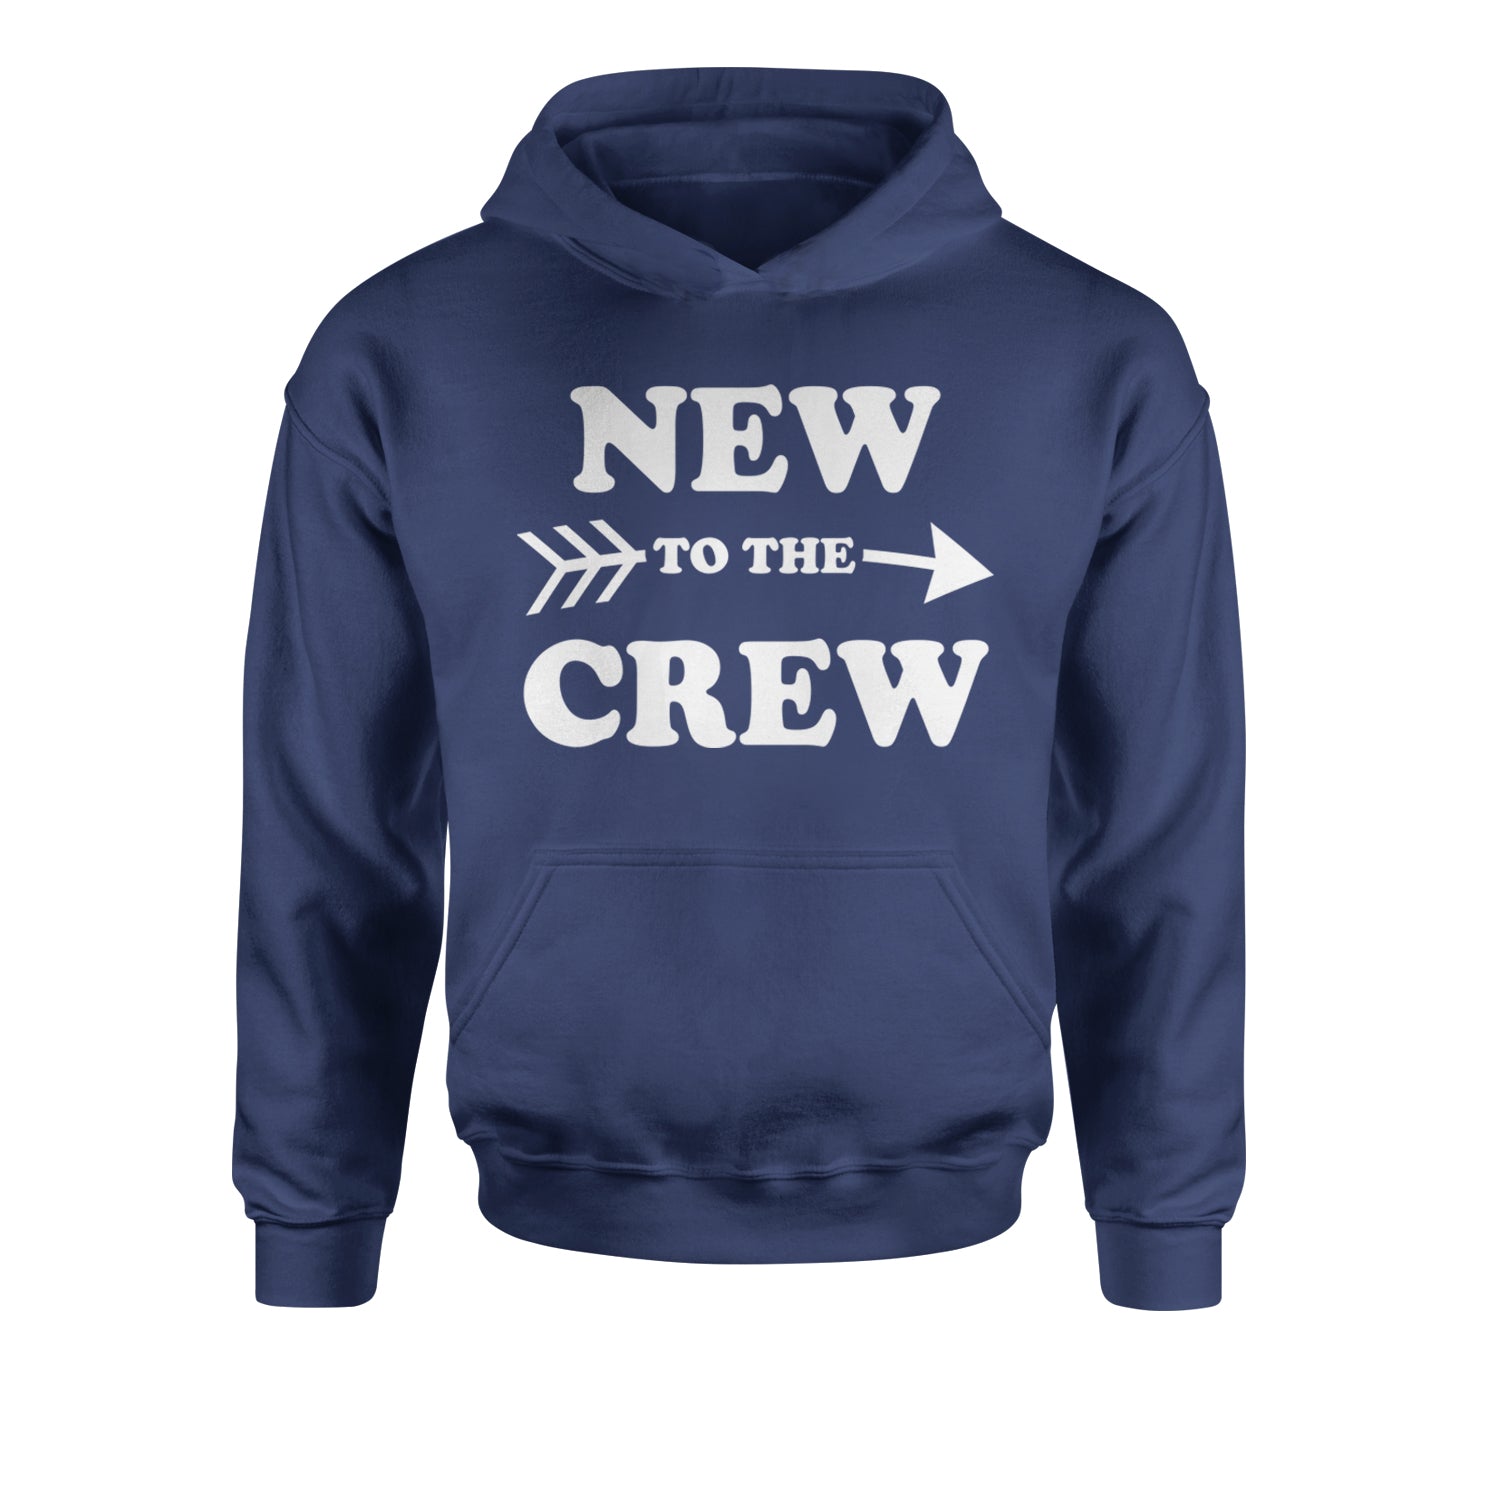 New To The Crew Youth-Sized Hoodie announcement, baby, cousin, gender, newborn, reveal, toddler by Expression Tees